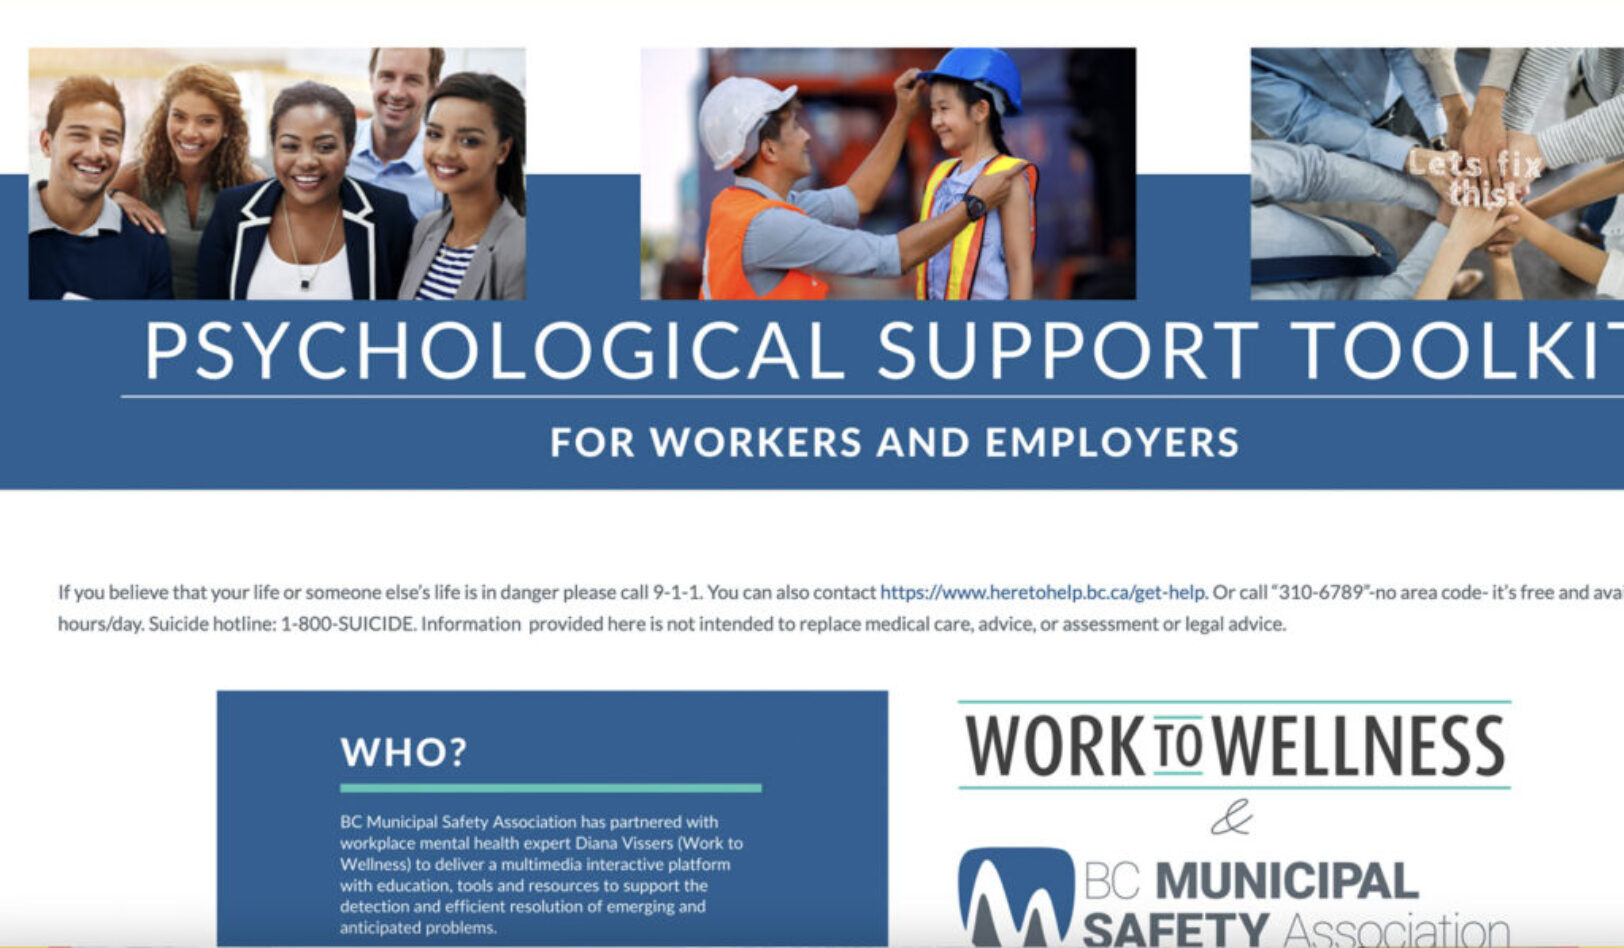 Psychological Support Toolkit for Workers and Employers: COVID-19